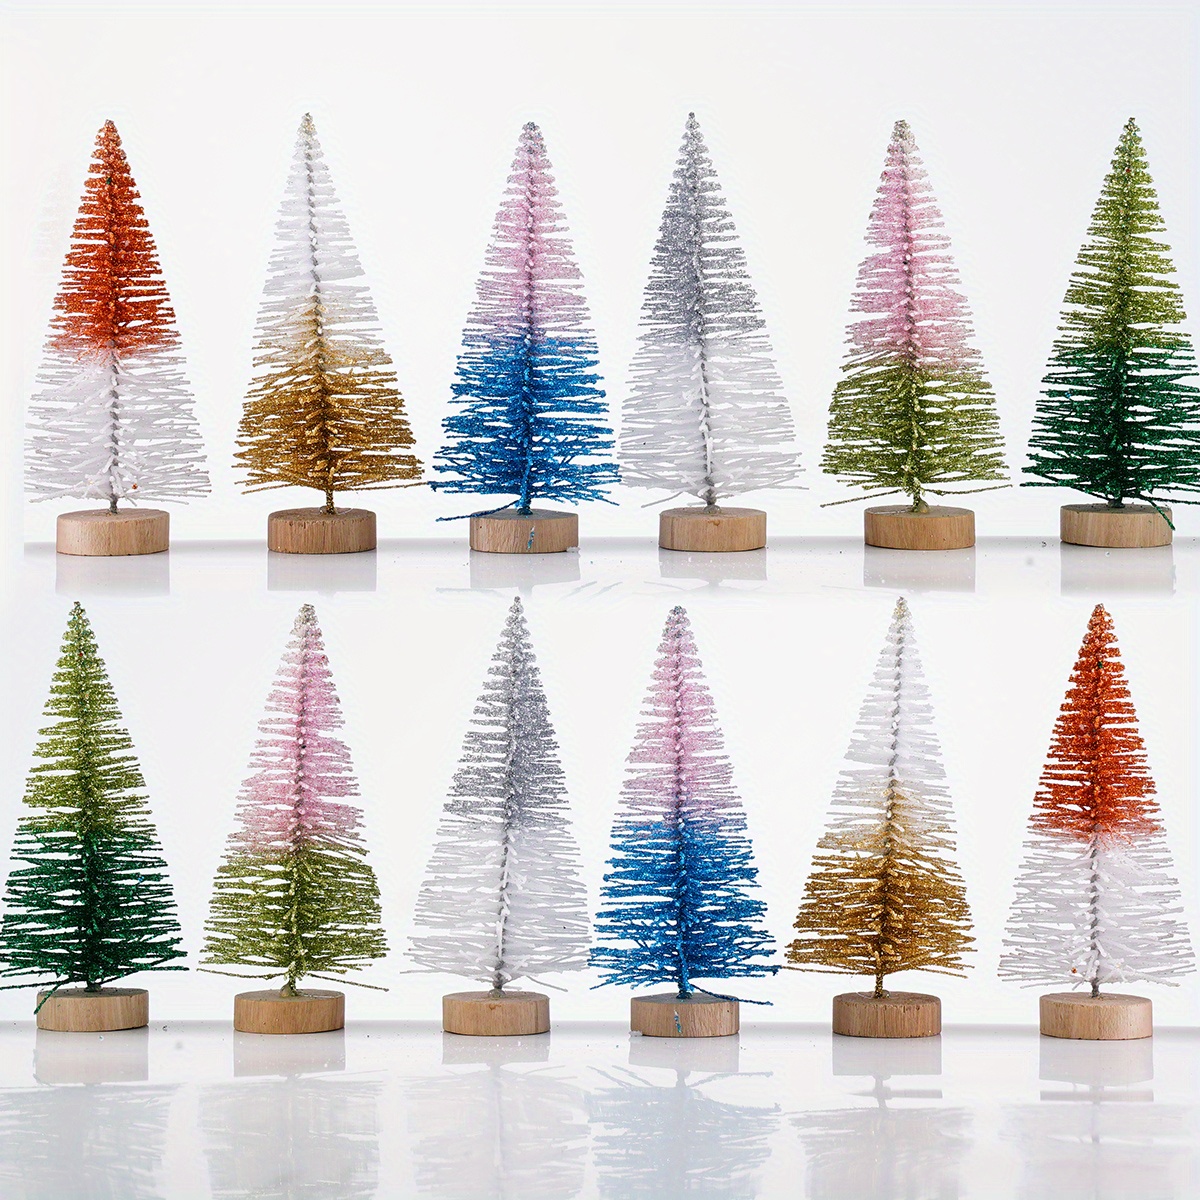 Craft Foam Cone Christmas Tree for DIY Crafts (10.2 Inches, 3 Pack) –  BrightCreationsOfficial